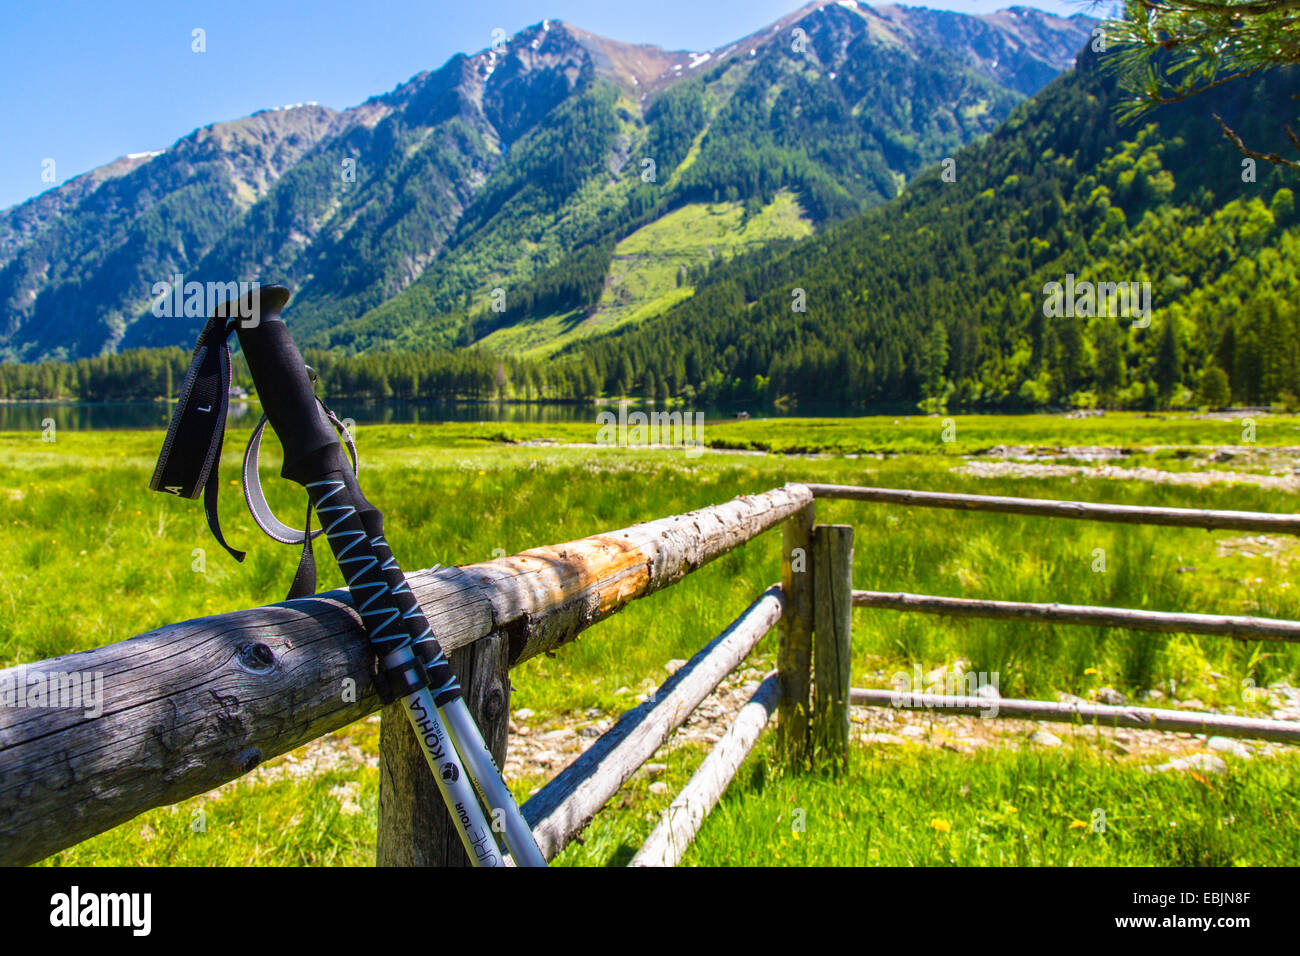 Hiking sticks in front of the mountains, Austria Stock Photo